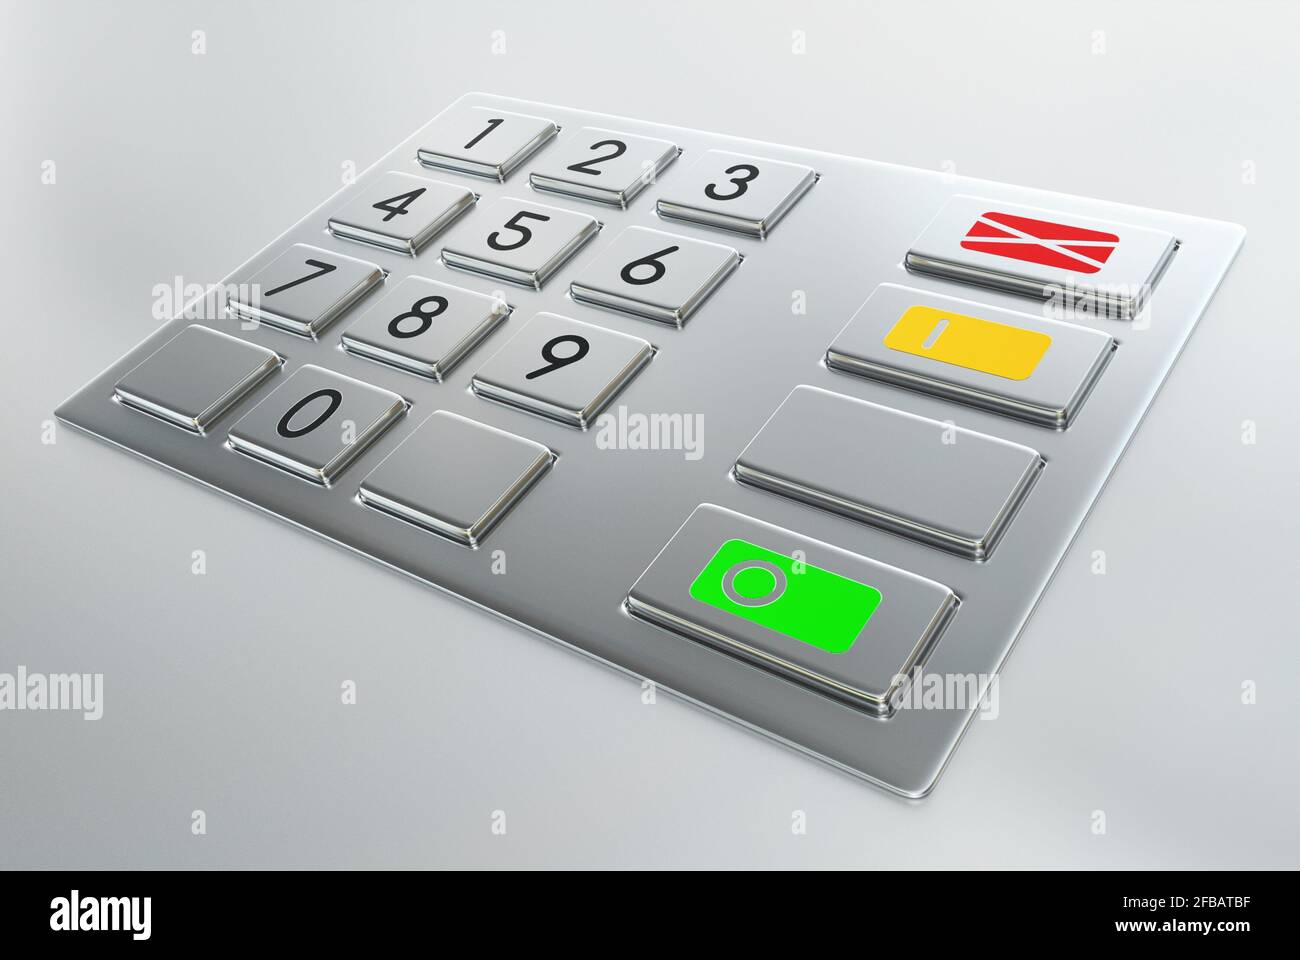 Atm machine keypad with numbers 3D illustration Stock Photo